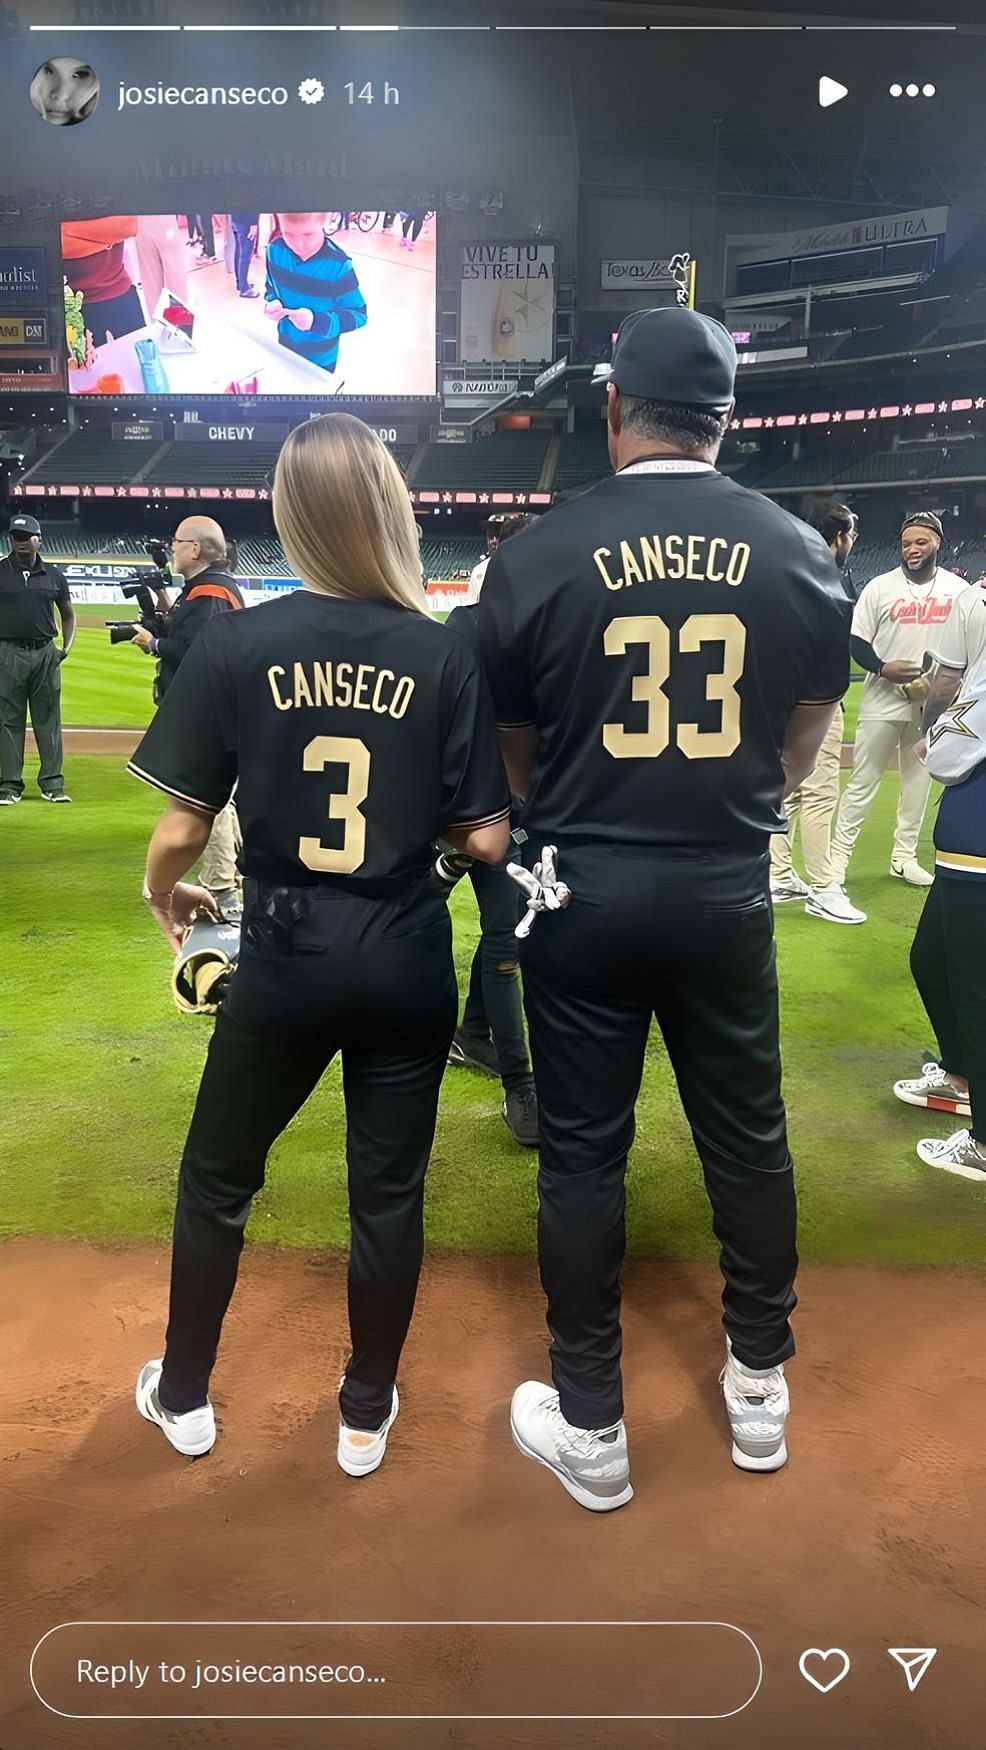 Josie and Jose Canseco